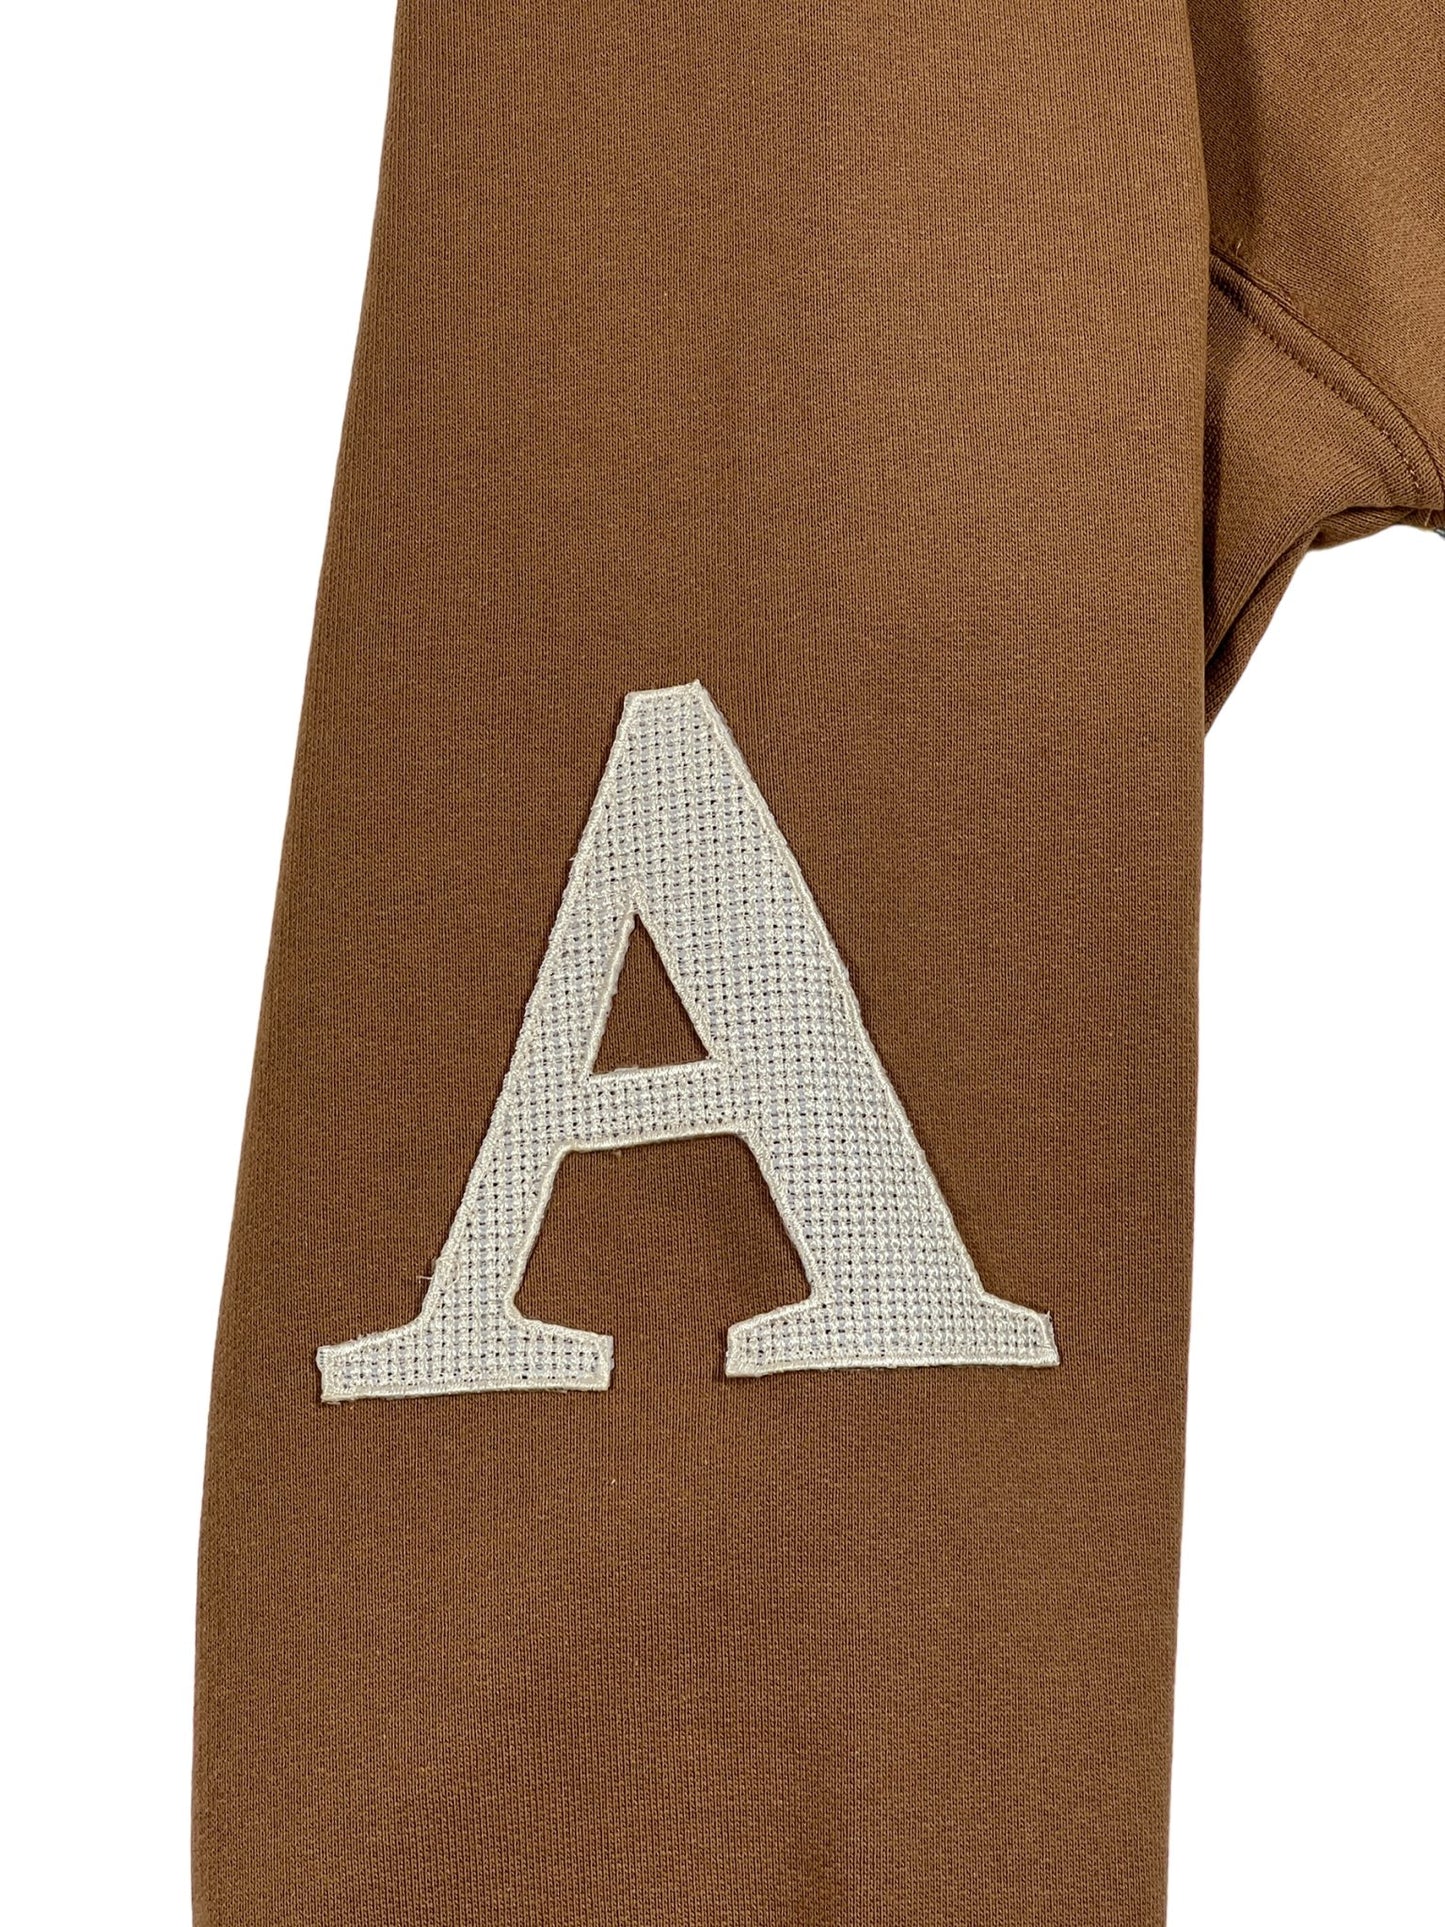 Close-up of a white letter 'a' patch sewn onto a brown AL AIN AHOX S102 PALMIER CHAMEAU hoodie.